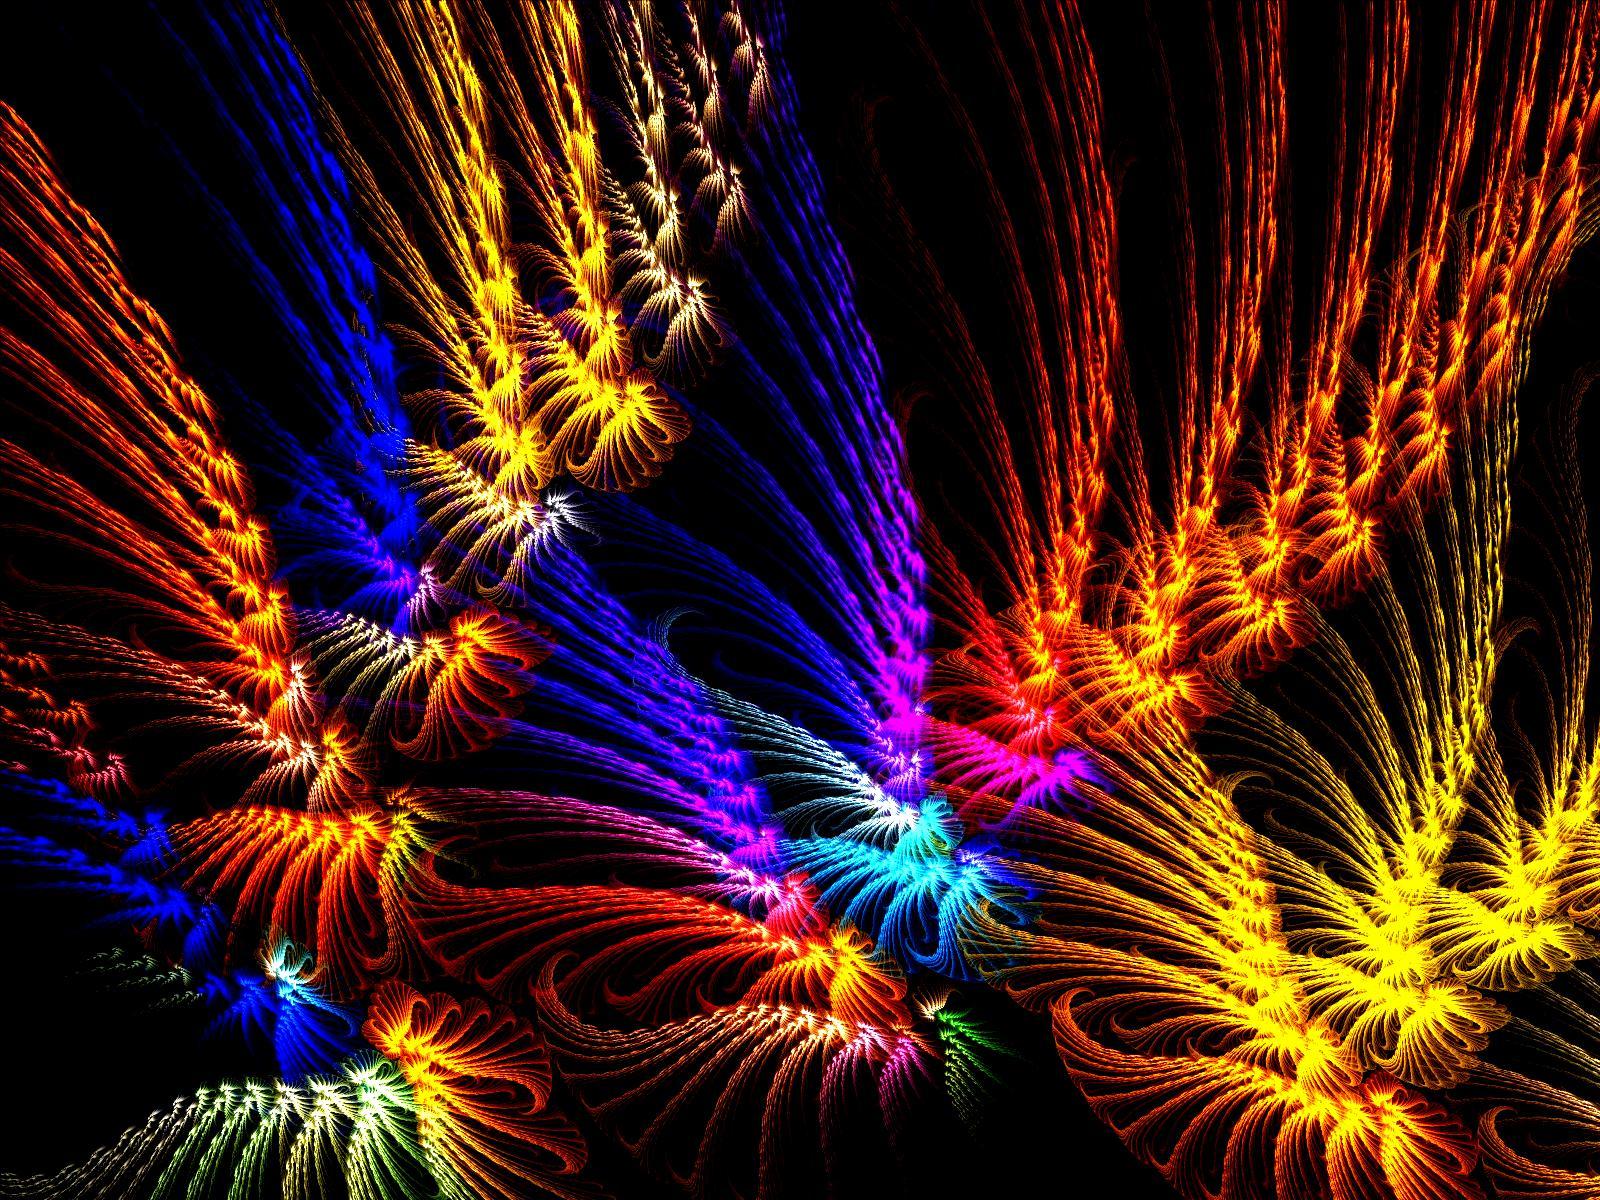 Tool Band Wallpaper. Inside the rainbow fractal abstract:High